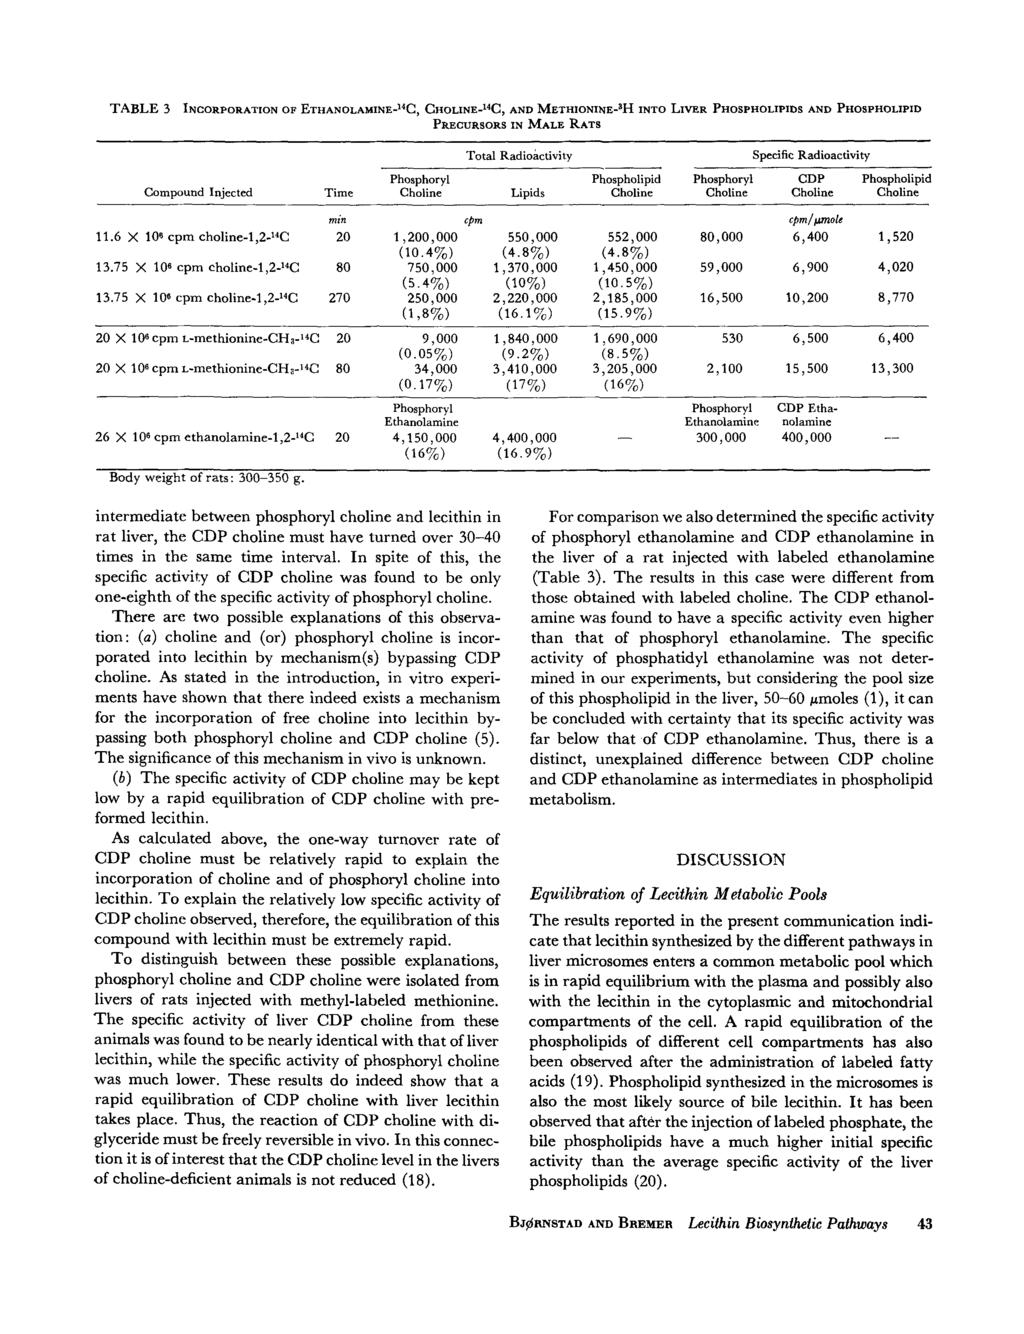 TABLE 3 INCORPORATION OF ETHANOLAMINE-'4C, ch0line-l4c, AND METHIONINE-3H INTO LIVER PHOSPHOLIPIDS AND PHOSPHOLIPID PRECURSORS IN MALE RATS Total Radioactivity Specific Radioactivity Phosphoryl